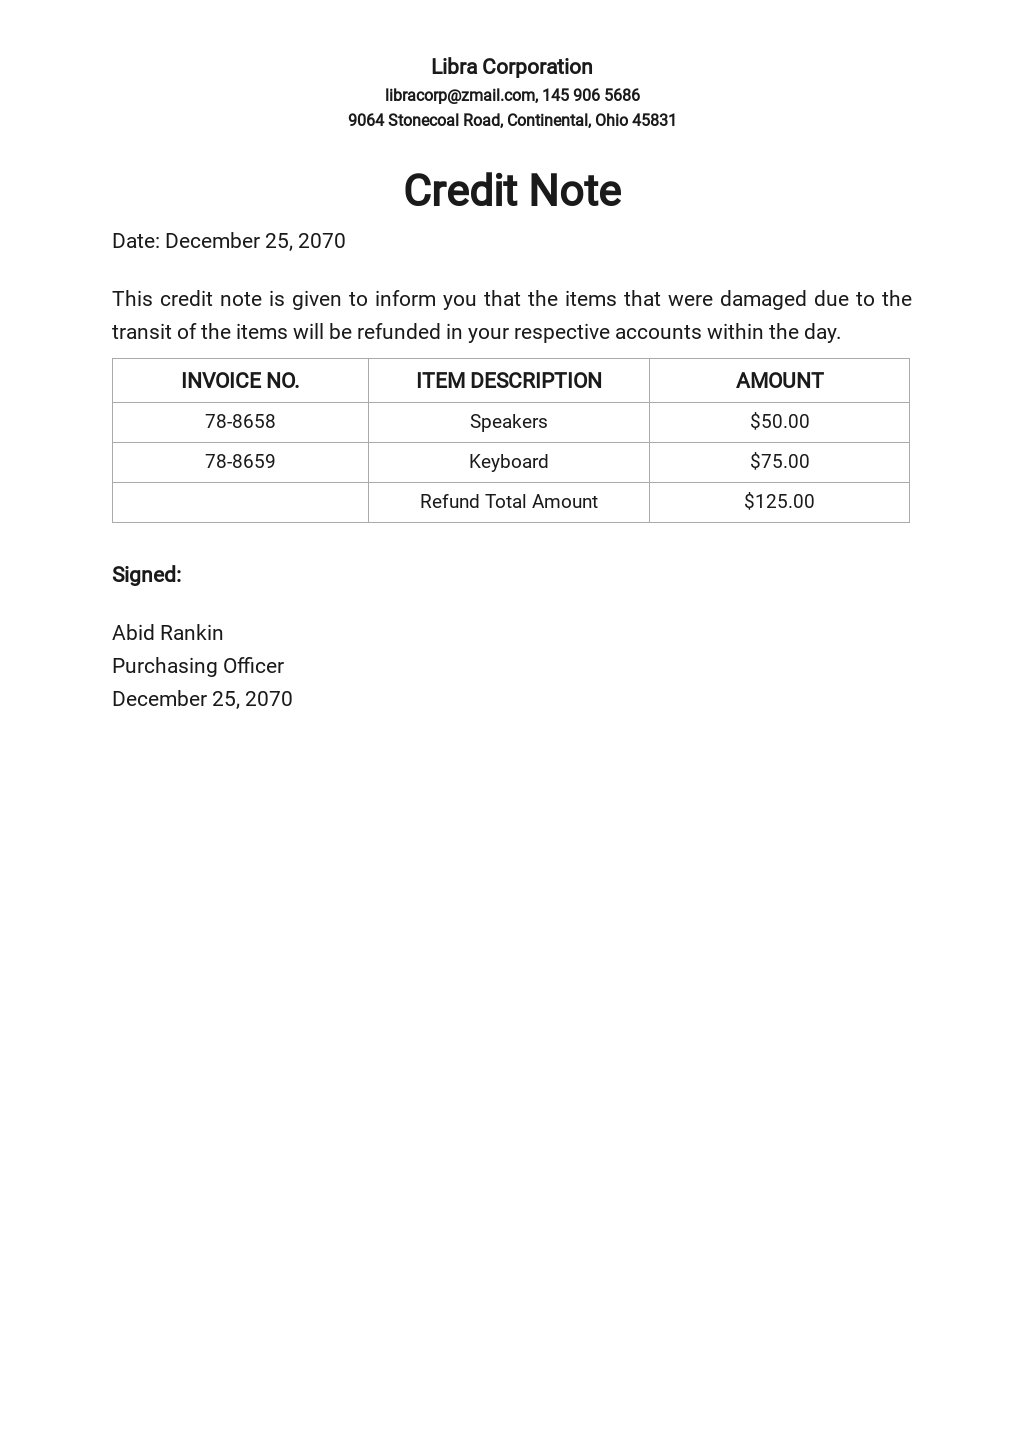 Credit Note sample Template - Google Docs, Google Sheets, Excel Throughout Credit Note Example Template